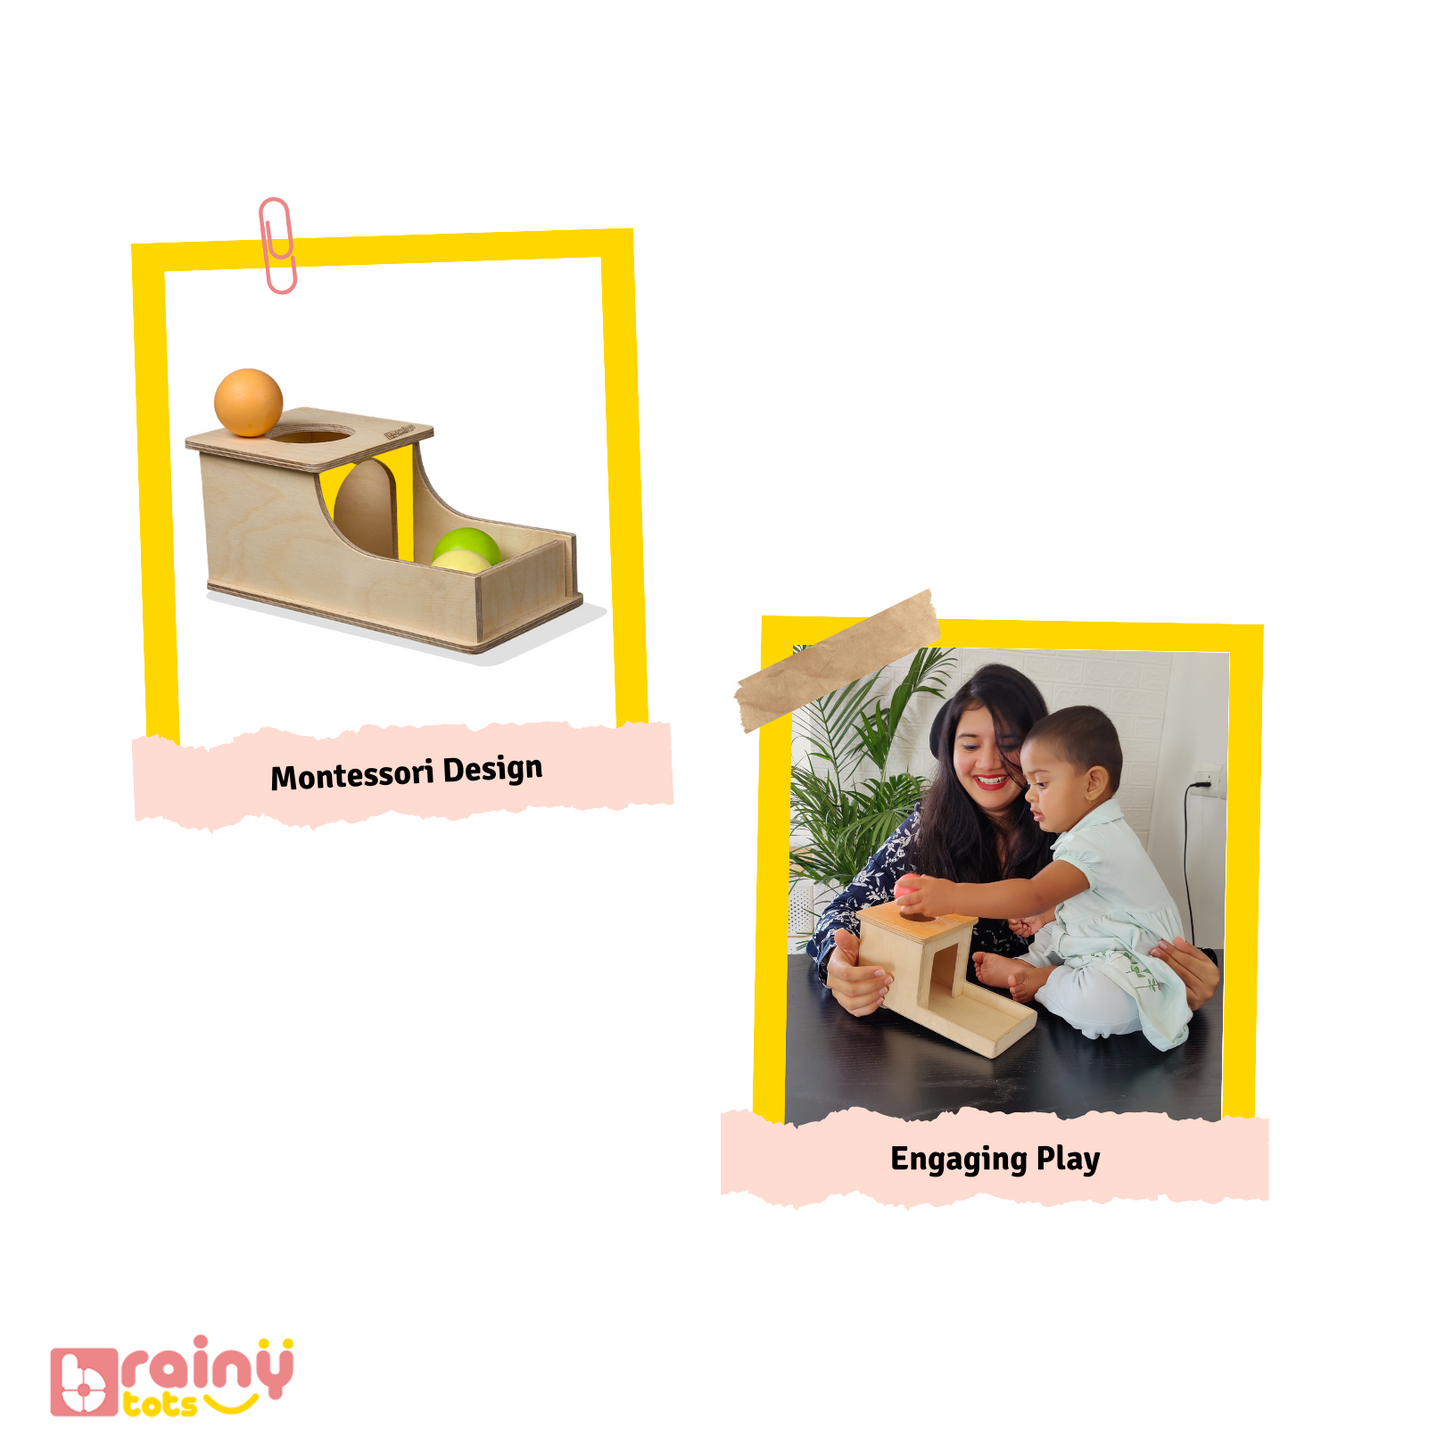 Explore the features of our Object Permanence Box, crafted to nurture your baby's cognitive development:  🟢 Encourages understanding of object permanence. 🟢 Includes colorful balls for interactive play. 🟢 Crafted from durable materials for long-lasting use. 🟢 Enhances hand-eye coordination and fine motor skills. 🟢 Provides engaging sensory exploration.  Elevate your baby's learning journey with BrainyTots.com.